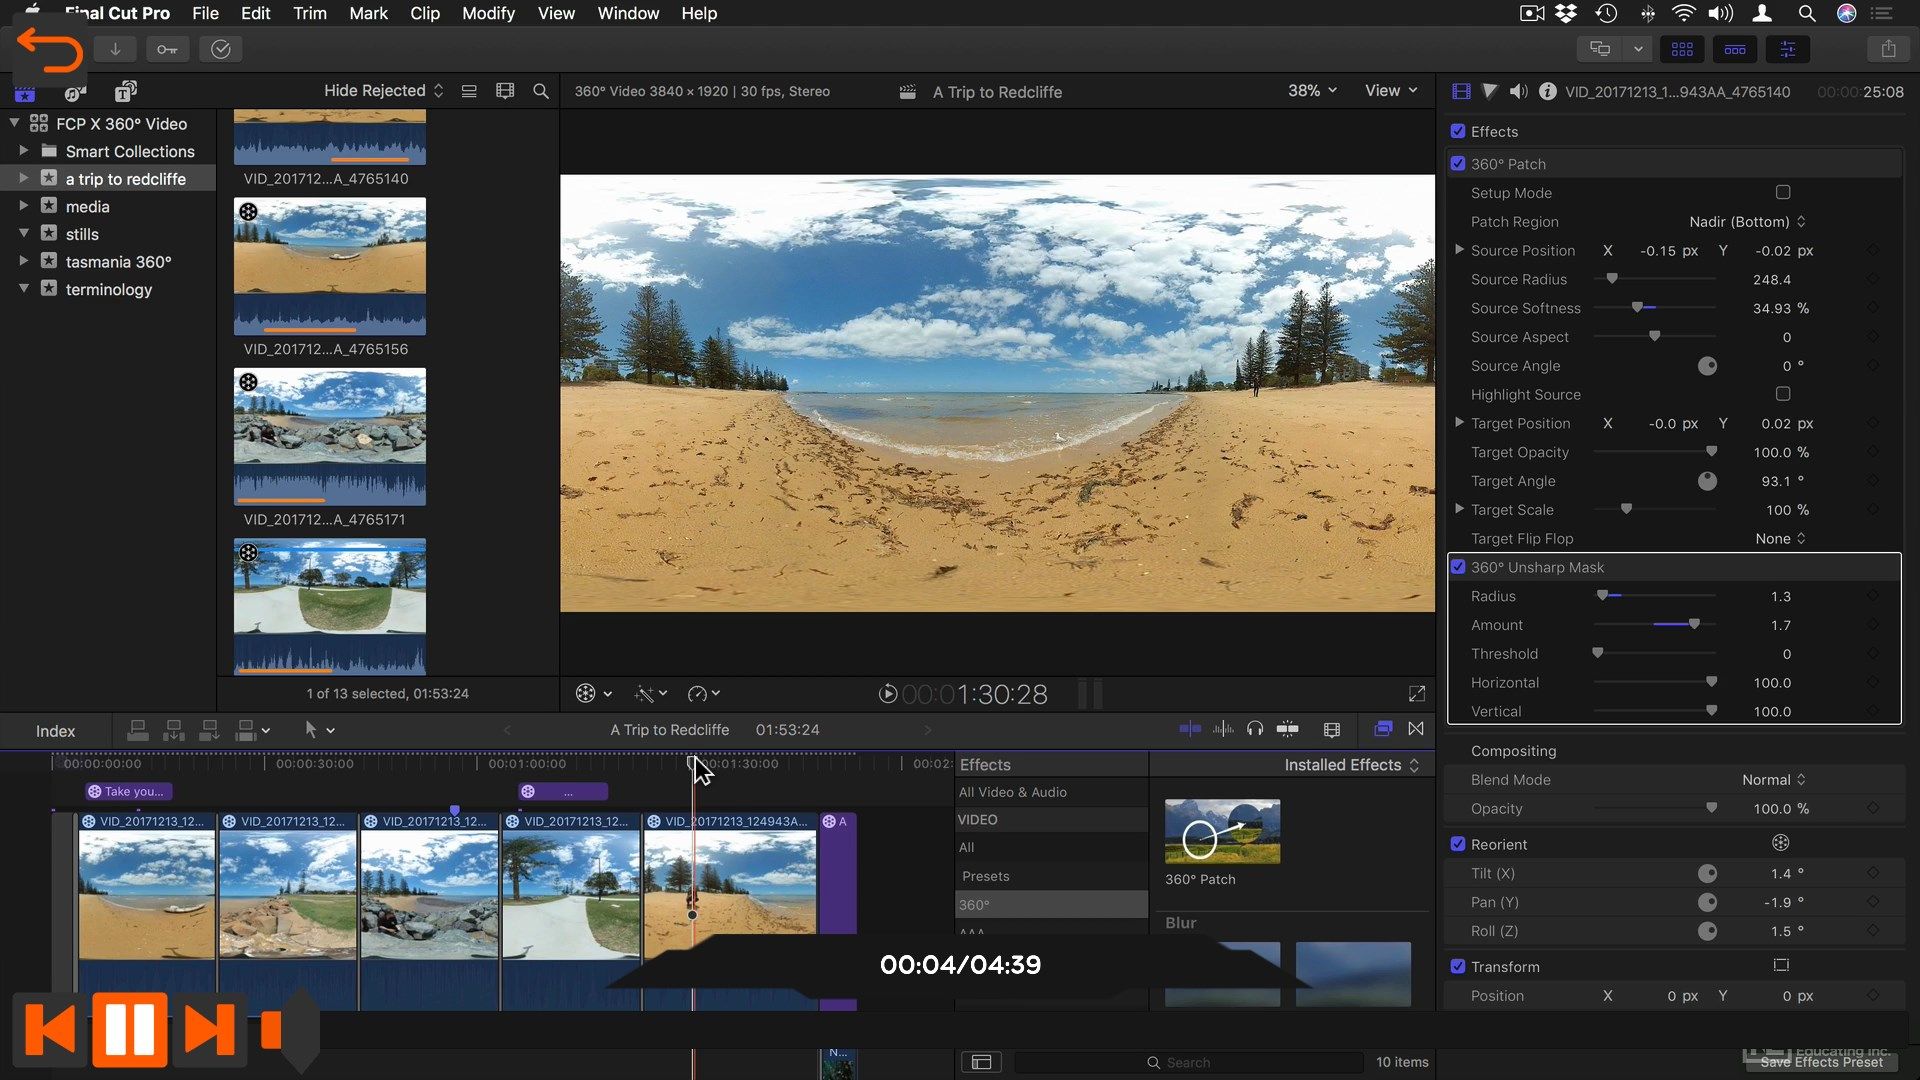 360 Tools Course For Final Cut Pro X